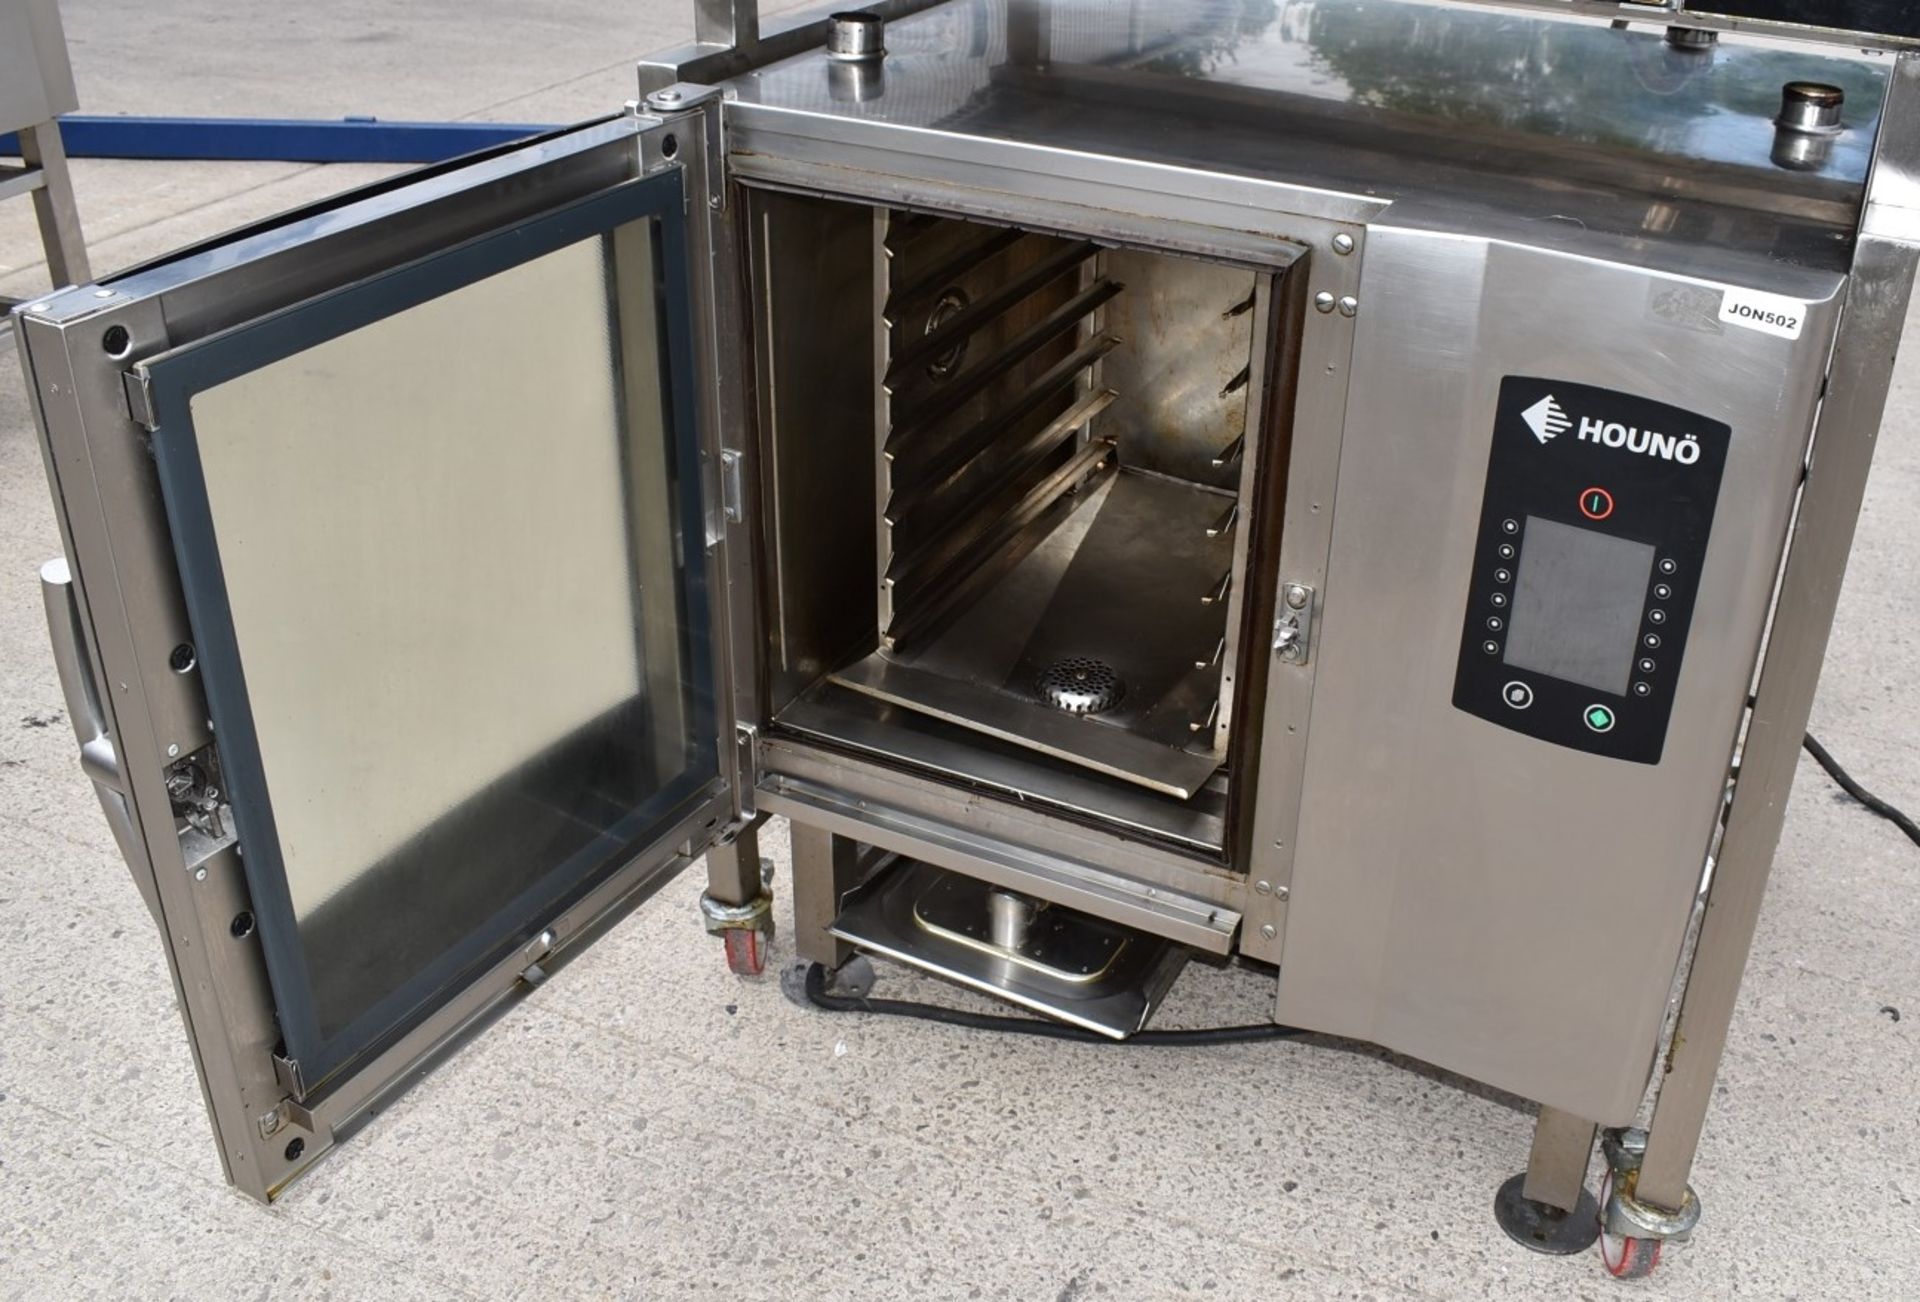 1 x Houno Electric Combi Oven and Fri-jado Rotisserie Oven Combo With Stand - 3 Phase - Image 17 of 22